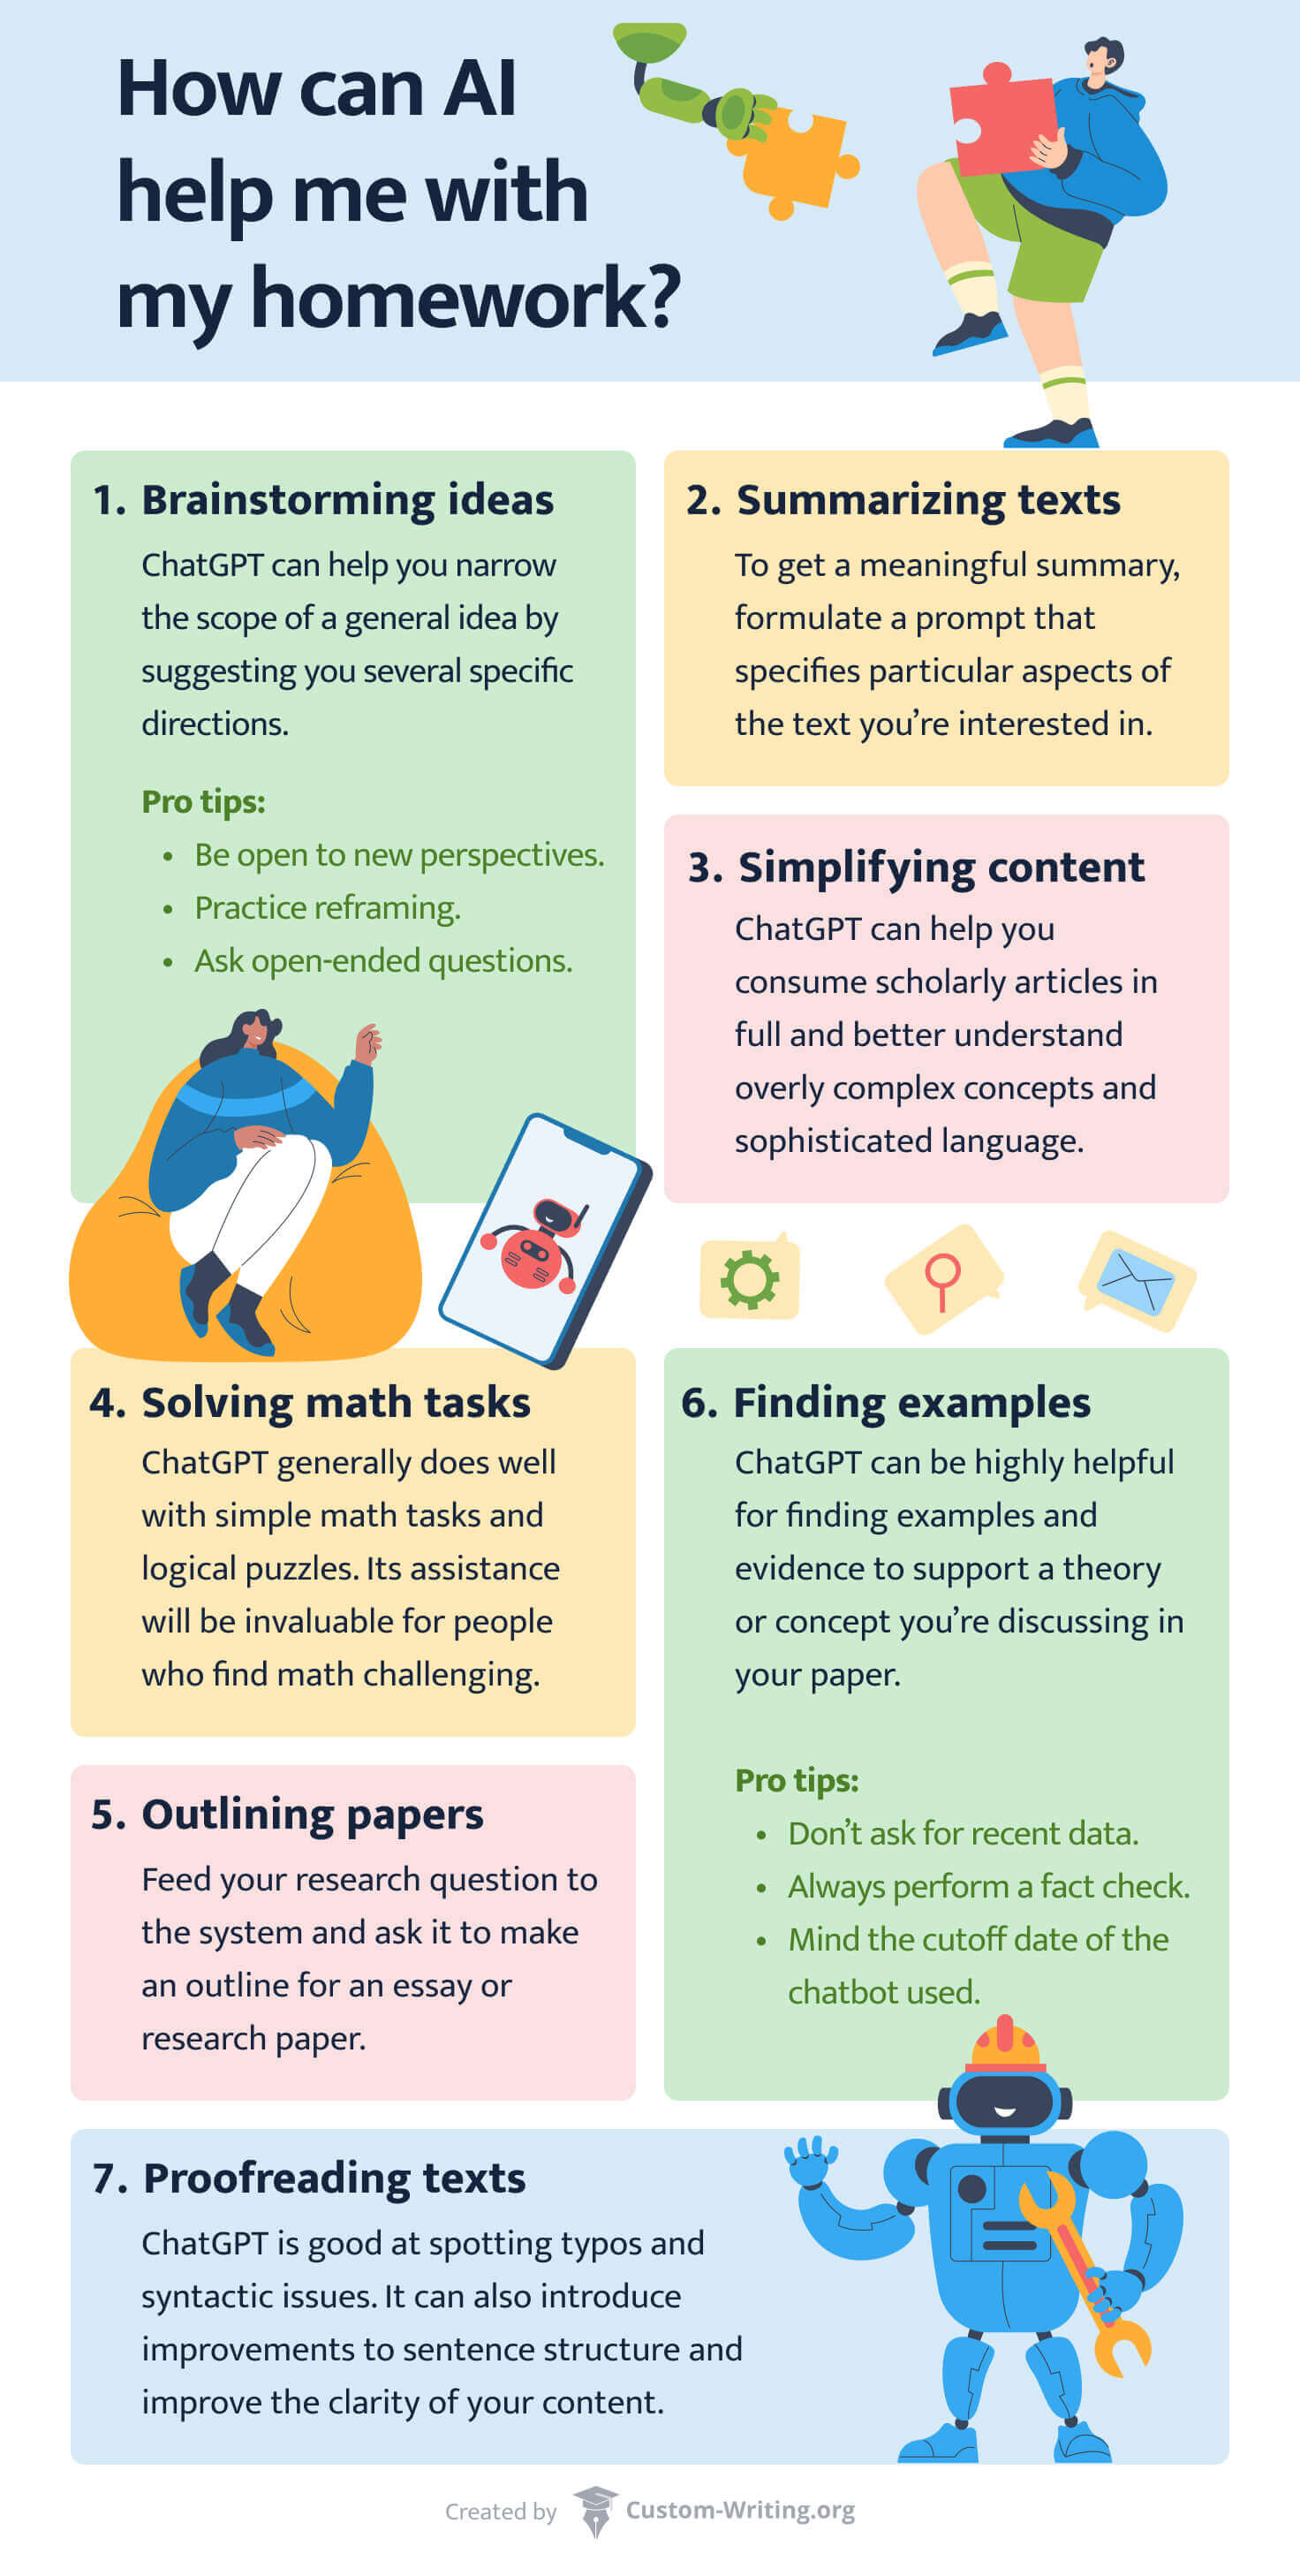 The picture lists 7 ways ChatGPT can be ethically used for homework.